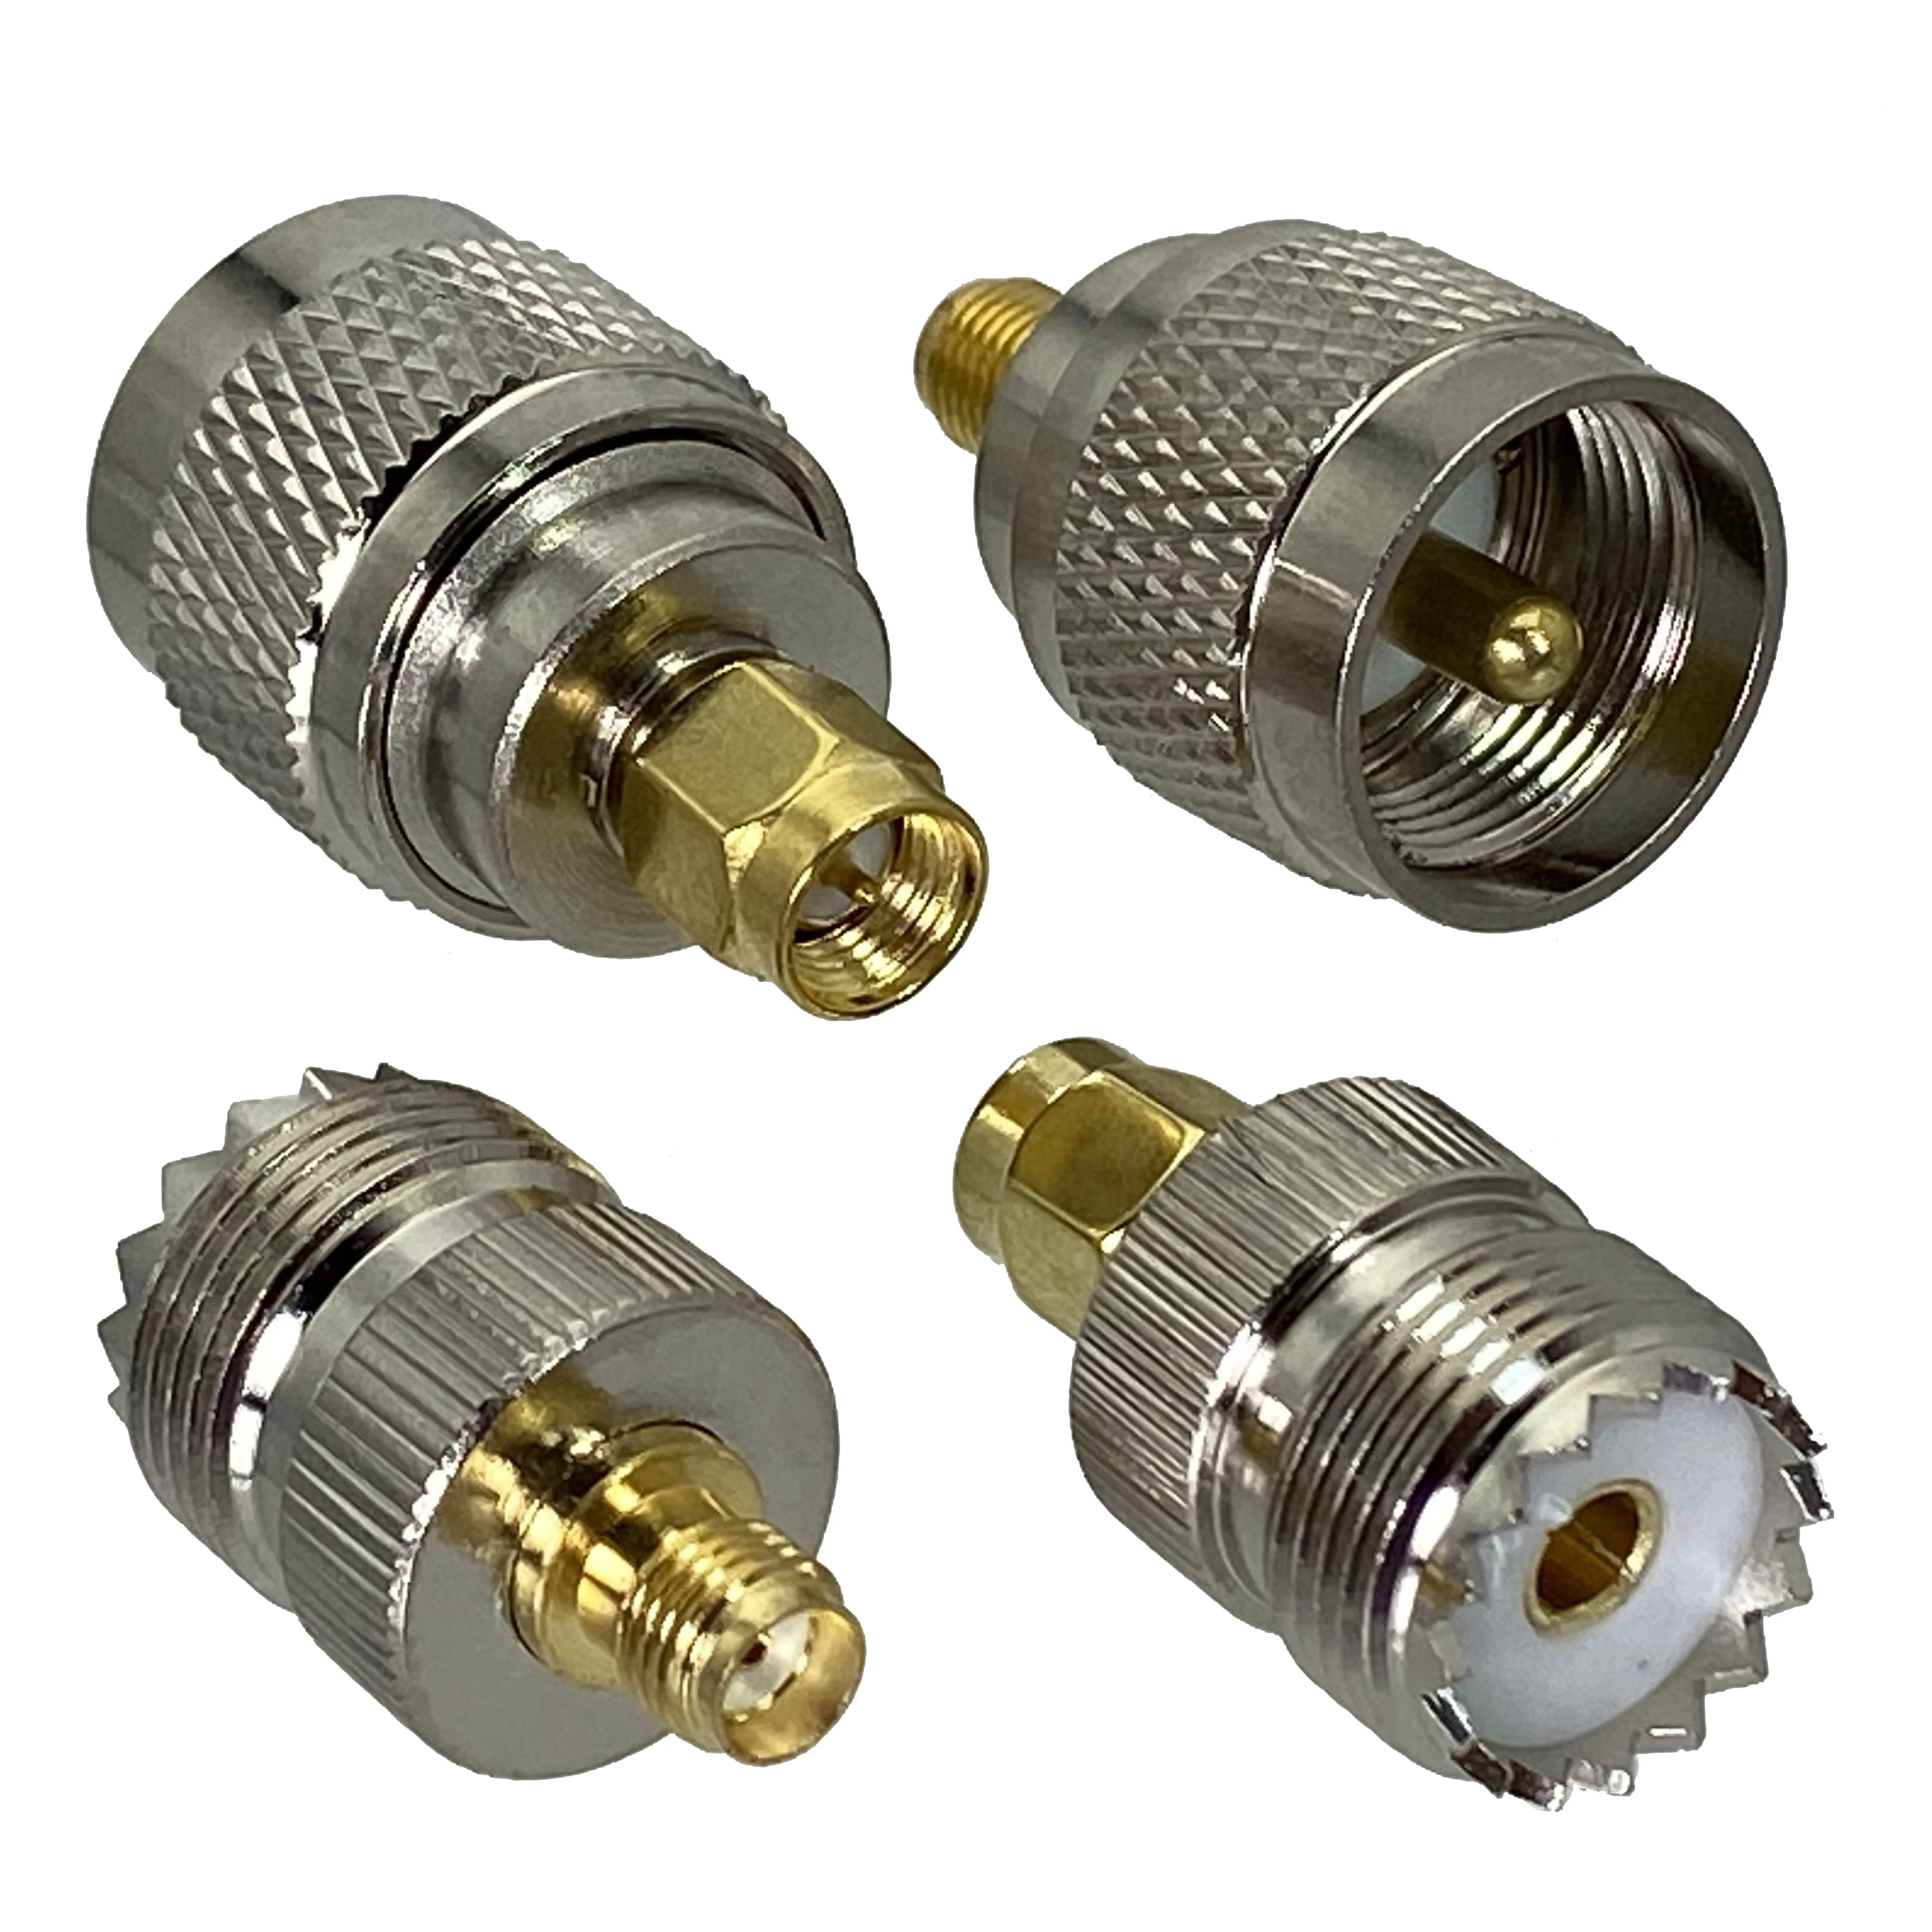 1pcs UHF SO239 PL259 to SMA Male Plug & Female Jack RF Coaxial Adapter Connector Wire Terminals Straight Brass